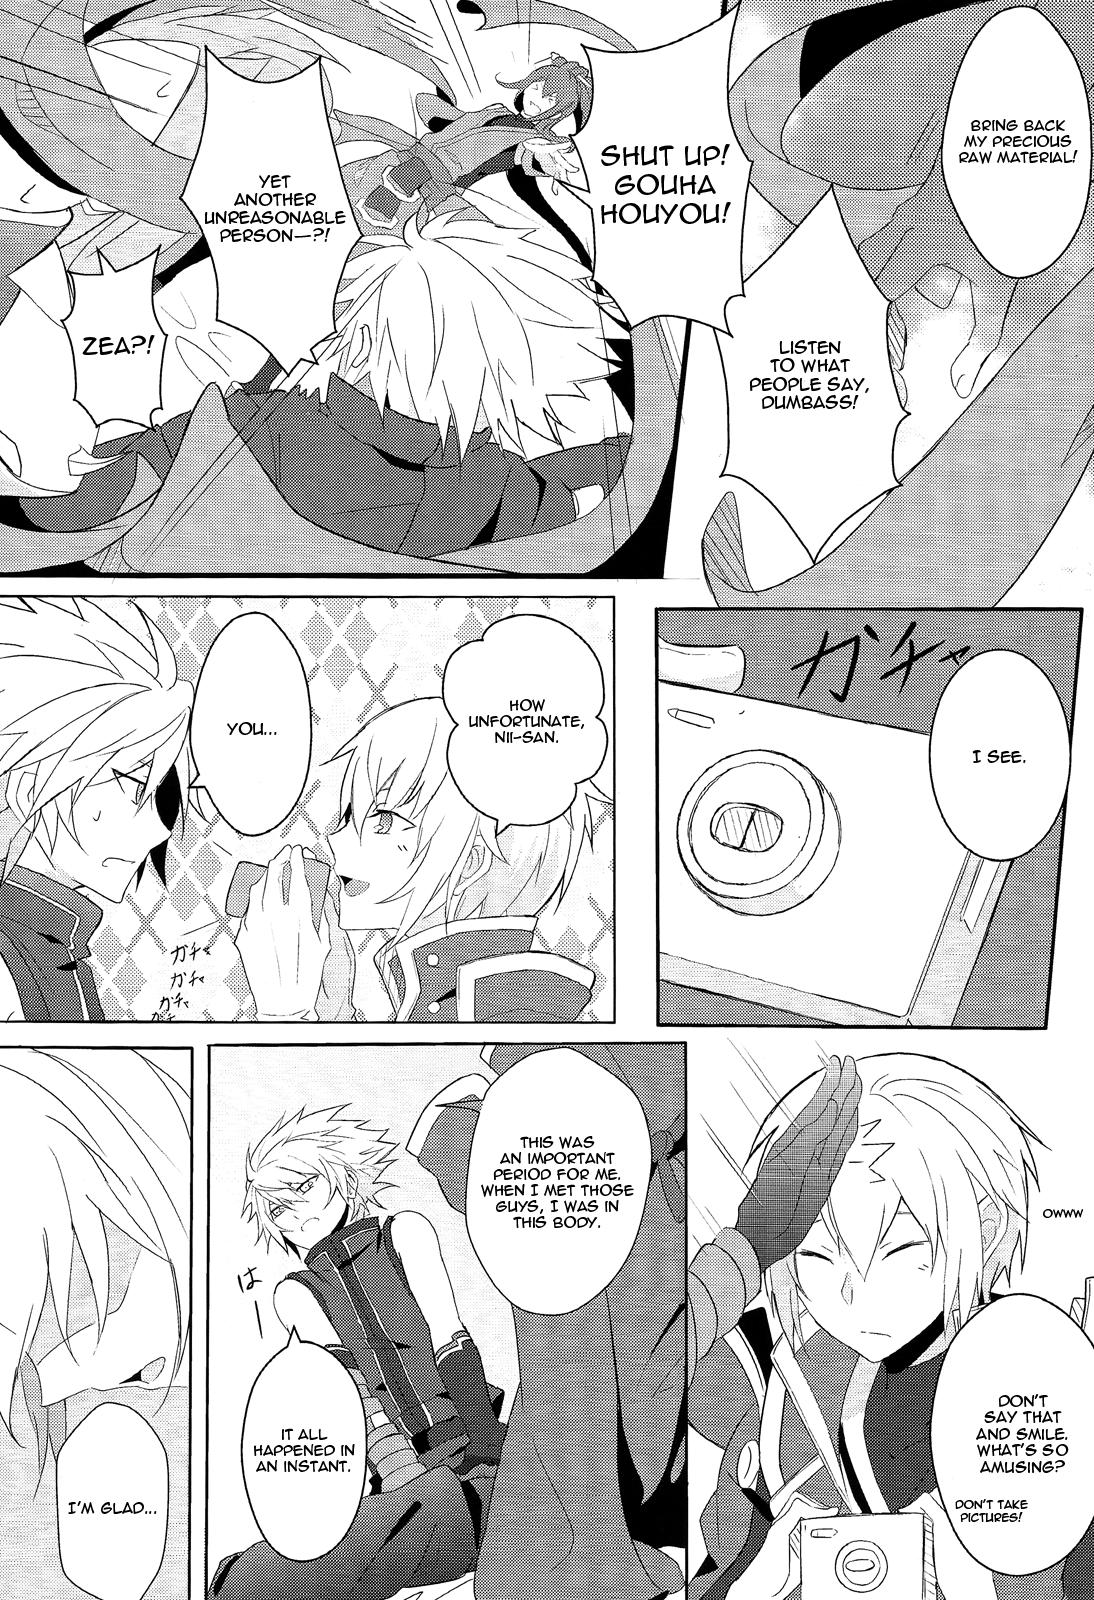 Granny Taking Back Time - Blazblue Doggie Style Porn - Page 7